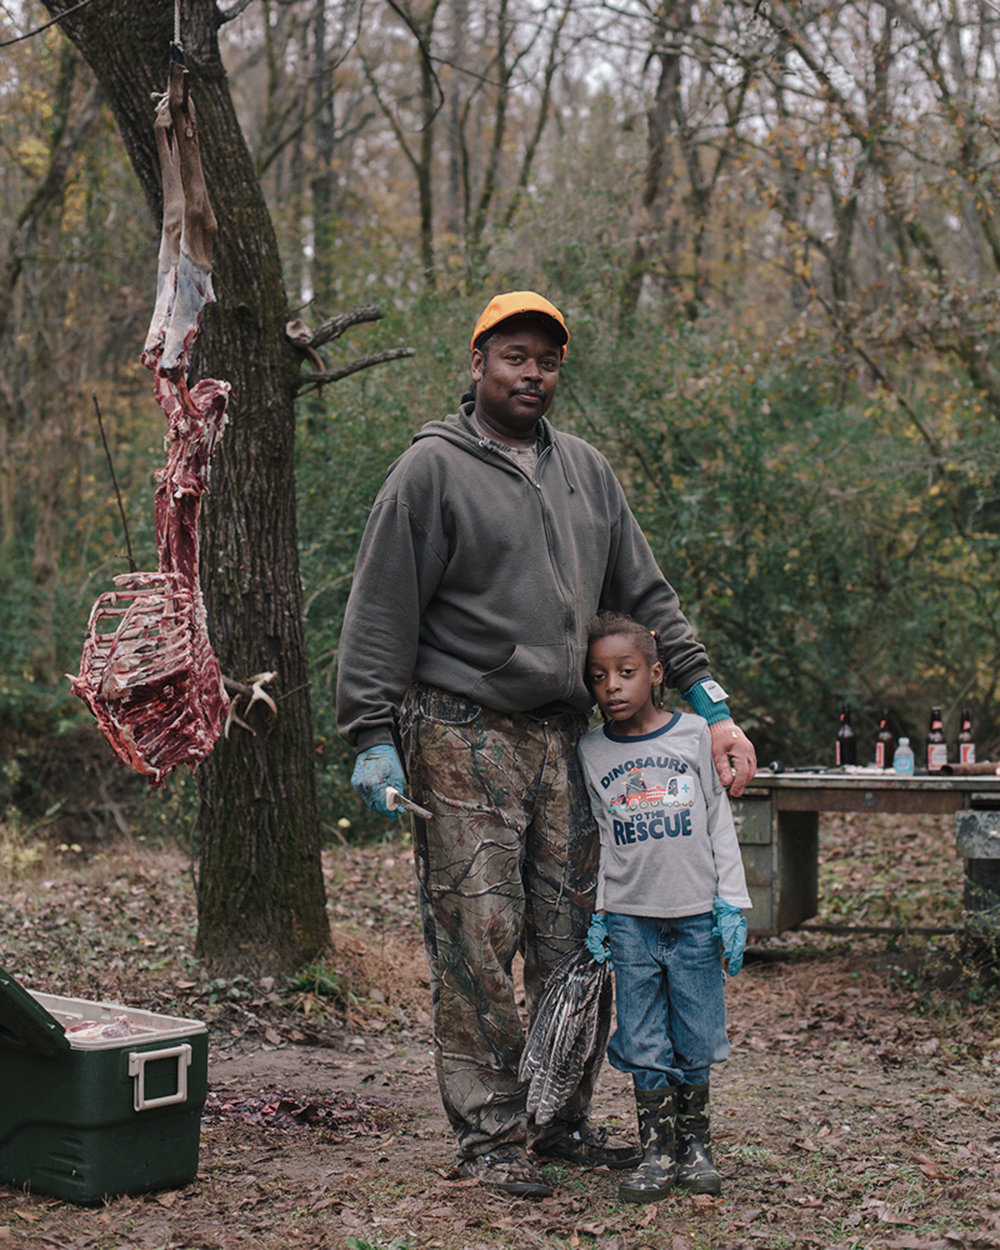   Jeffrey &amp; Jr. Skinning a Deer  Archival Pigment Print  30 × 24 in. (image size) The Do Good Fund, Inc., 2013-014 